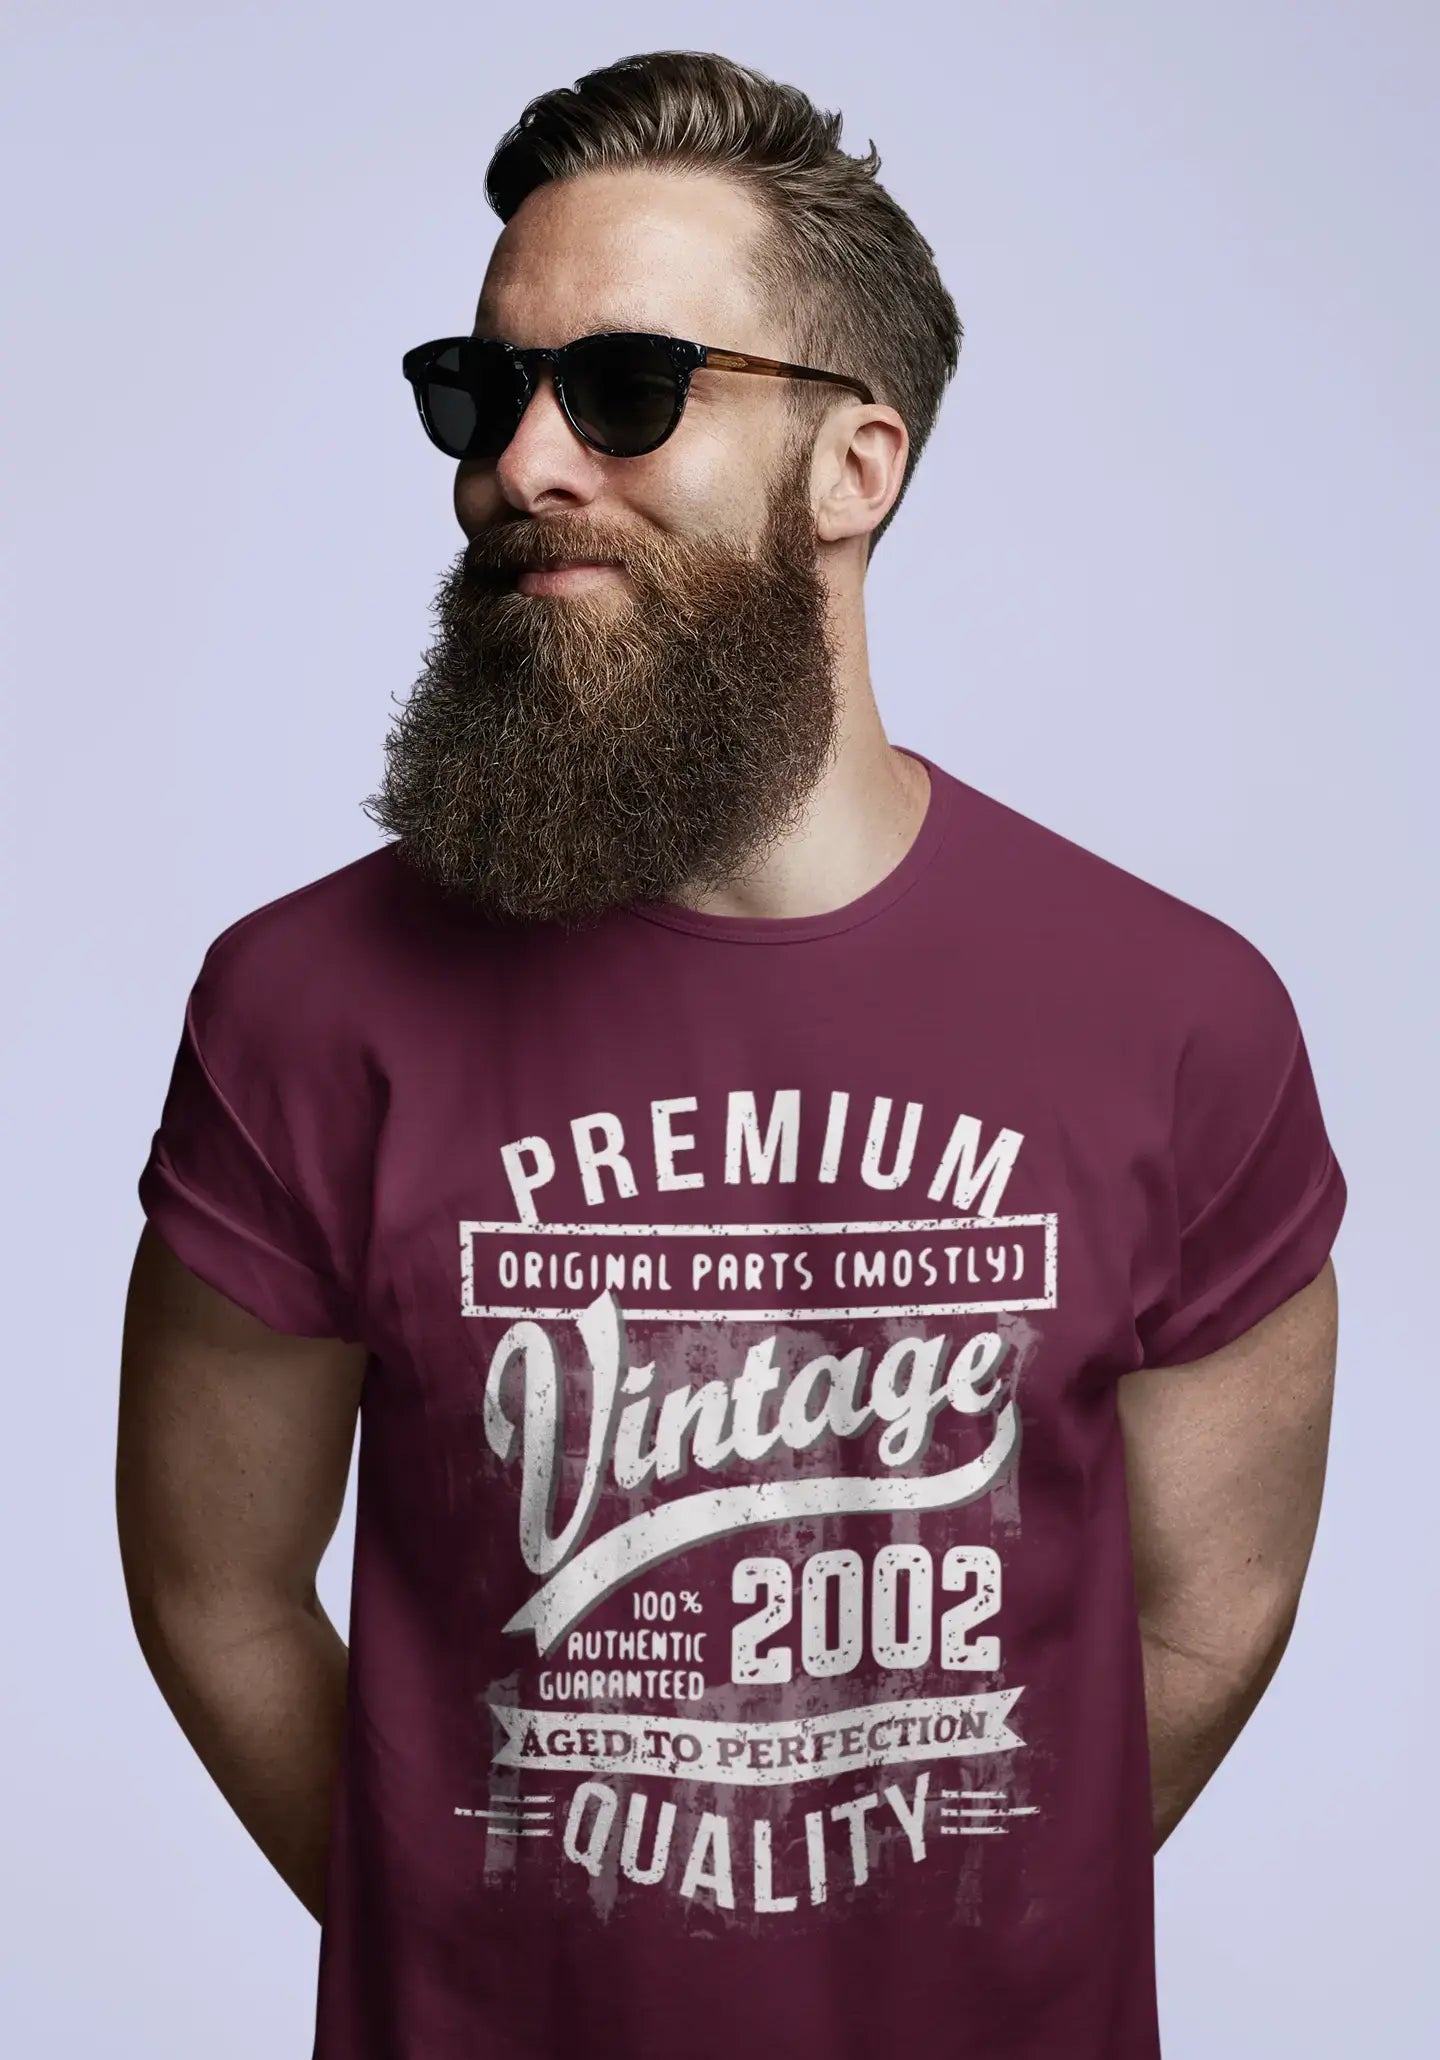 ULTRABASIC - Graphic Men's 2002 Aged to Perfection Birthday Gift T-Shirt